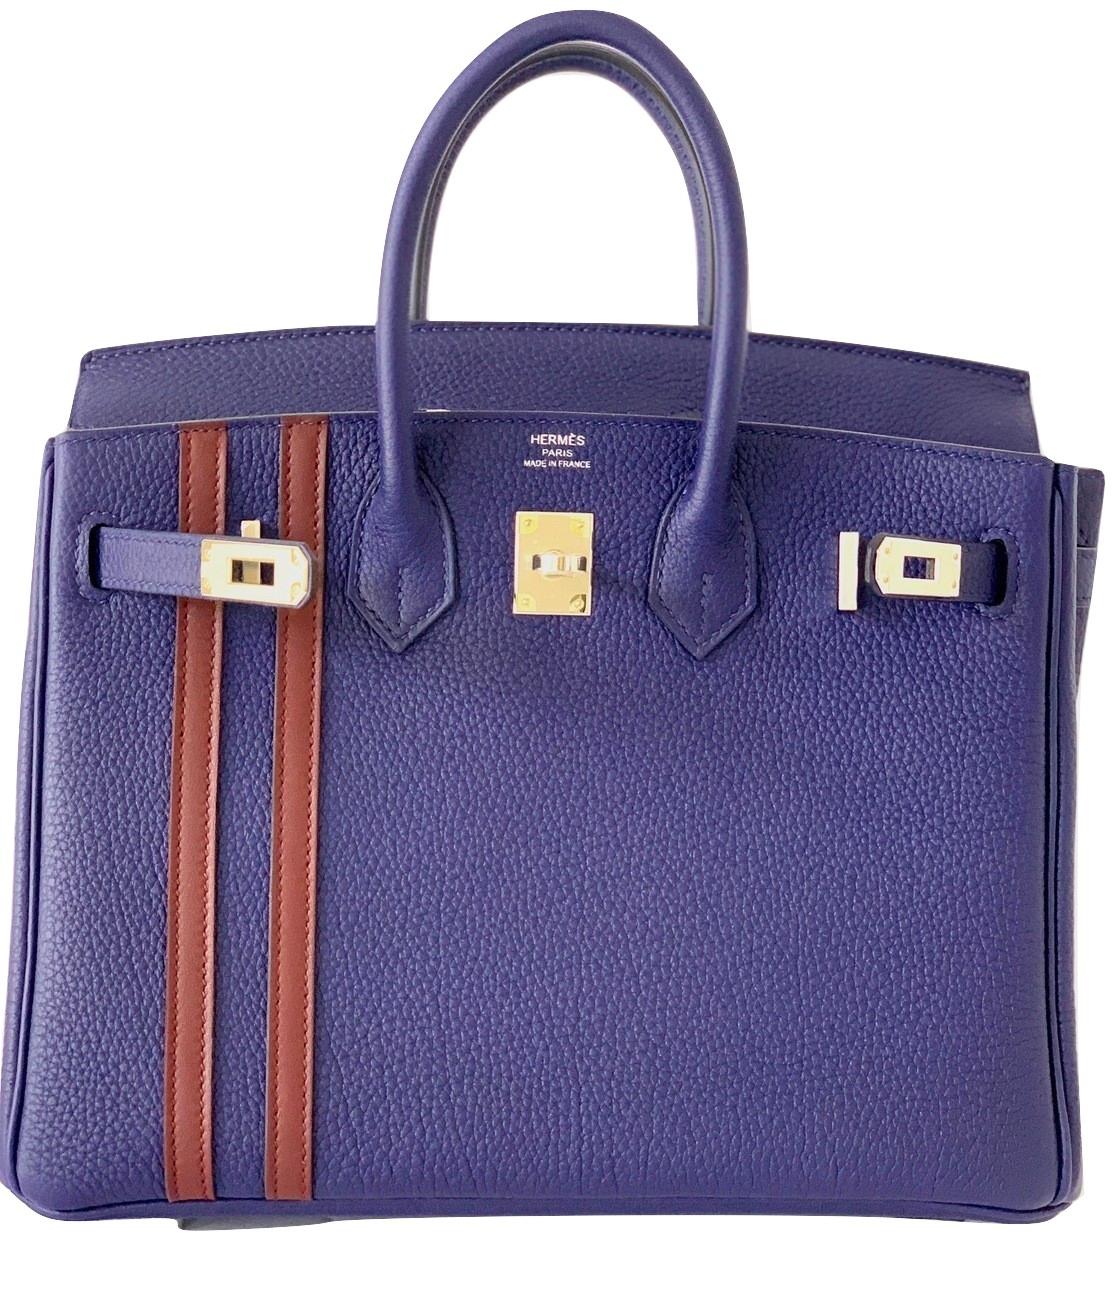 Hermes Limited Edition Birkin

25cm

The Officier

Blue Encre with Bordeaux

Togo Leather

Swift Stripe

Palladium Hardware

Collection: C
Measurements
Base Length: 9.75 in
Height: 7.75 in
Width: 5 in
Drop: 2.25 in

Hermes Box, Tissue, Lock and 2